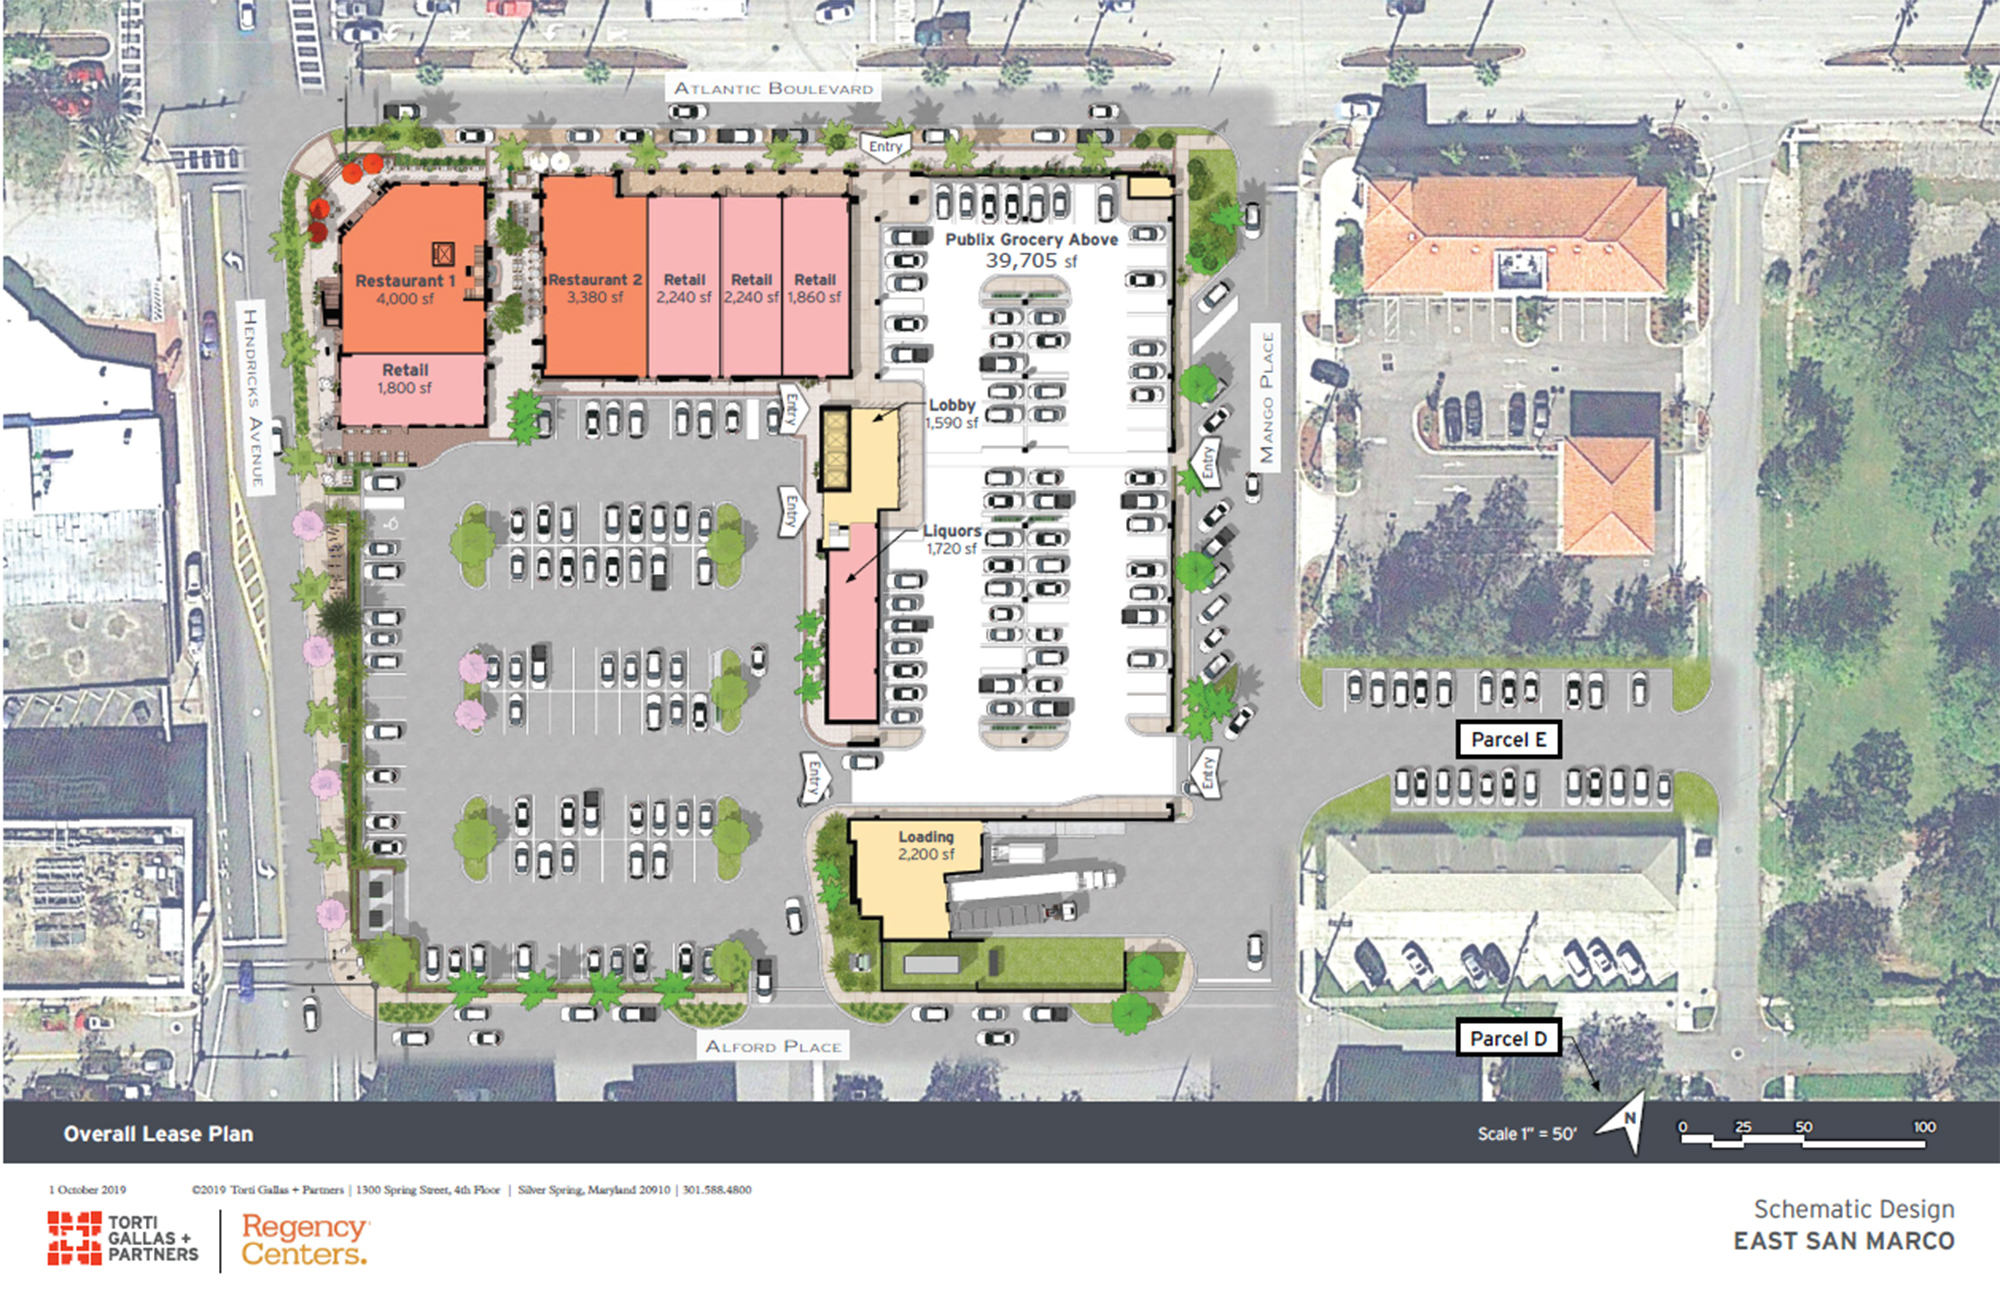 The site plan for the East San Marco shopping center shows the parking garage under the Publix grocery store.